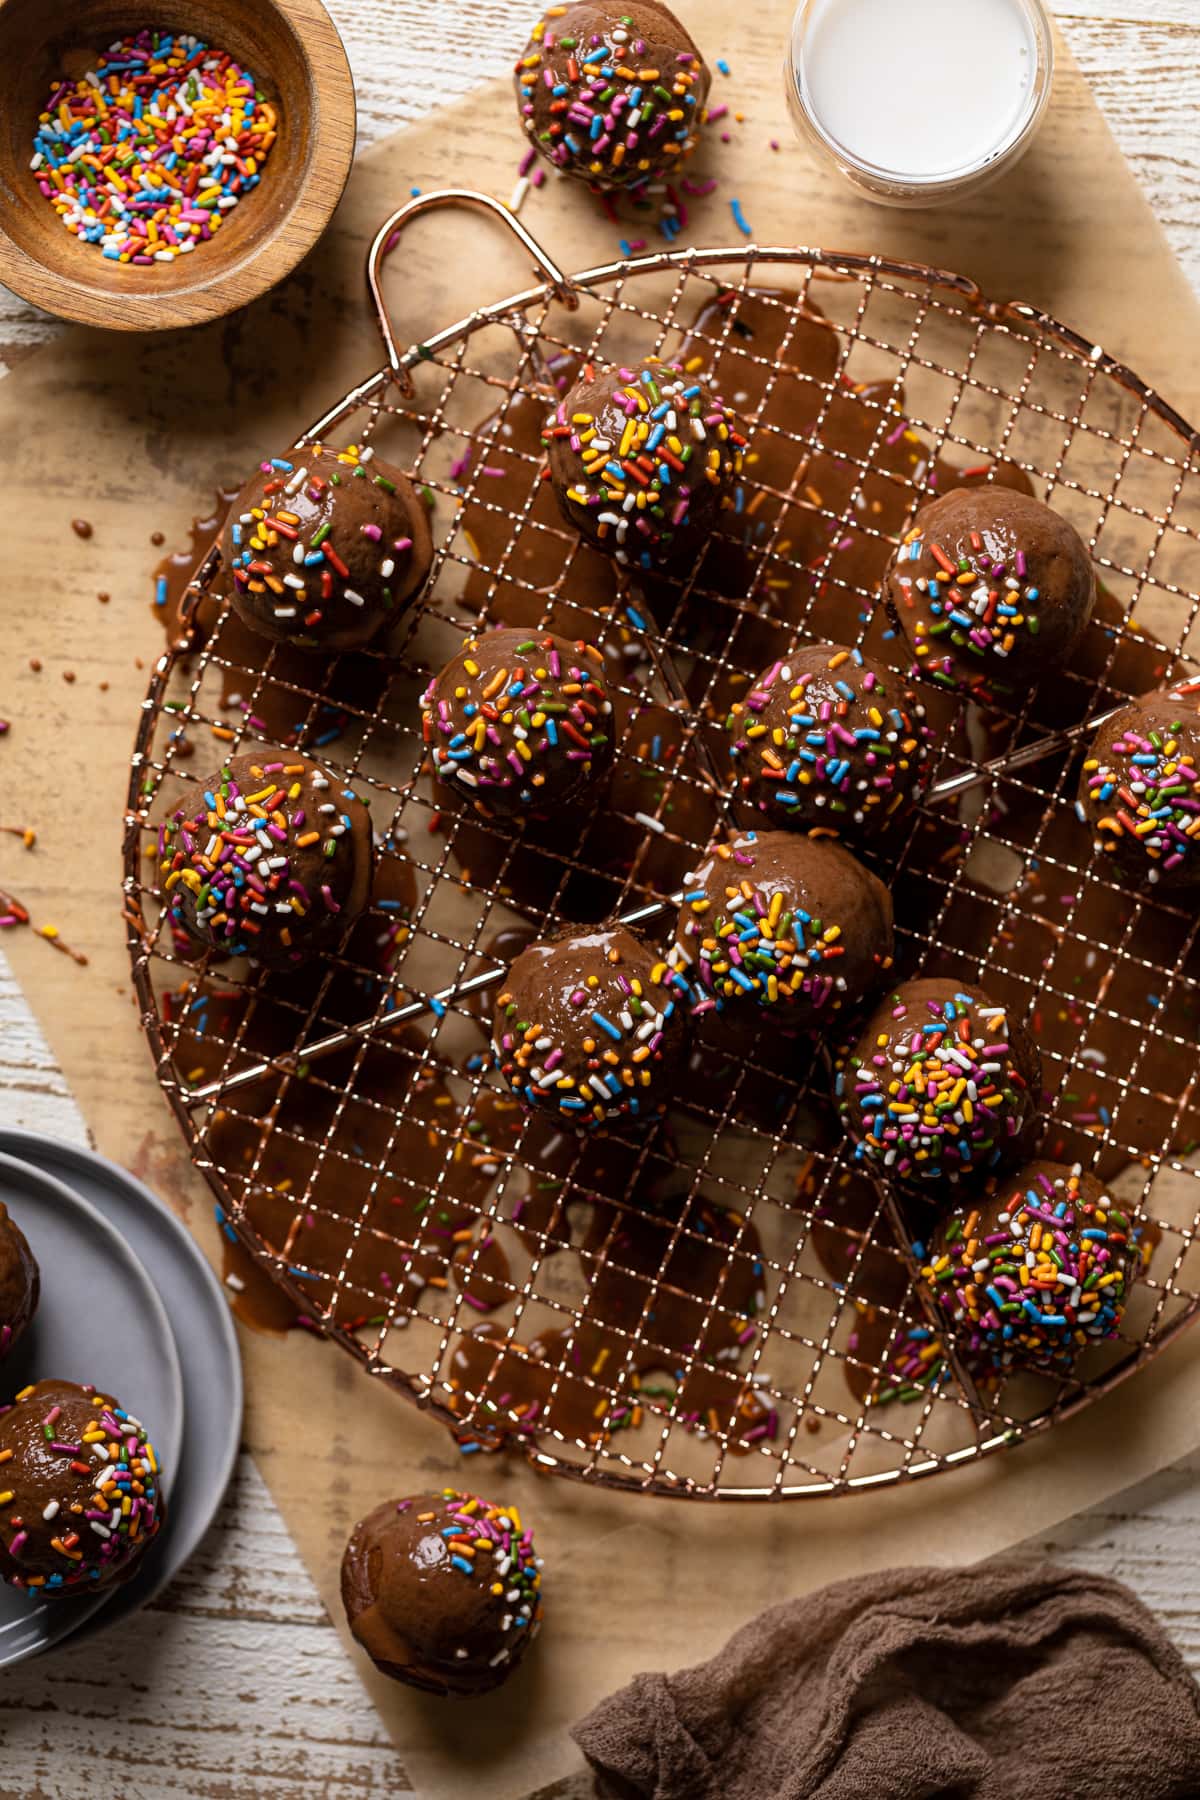 Vegan Chocolate Donut Holes topped with sprinkles on a wire rack